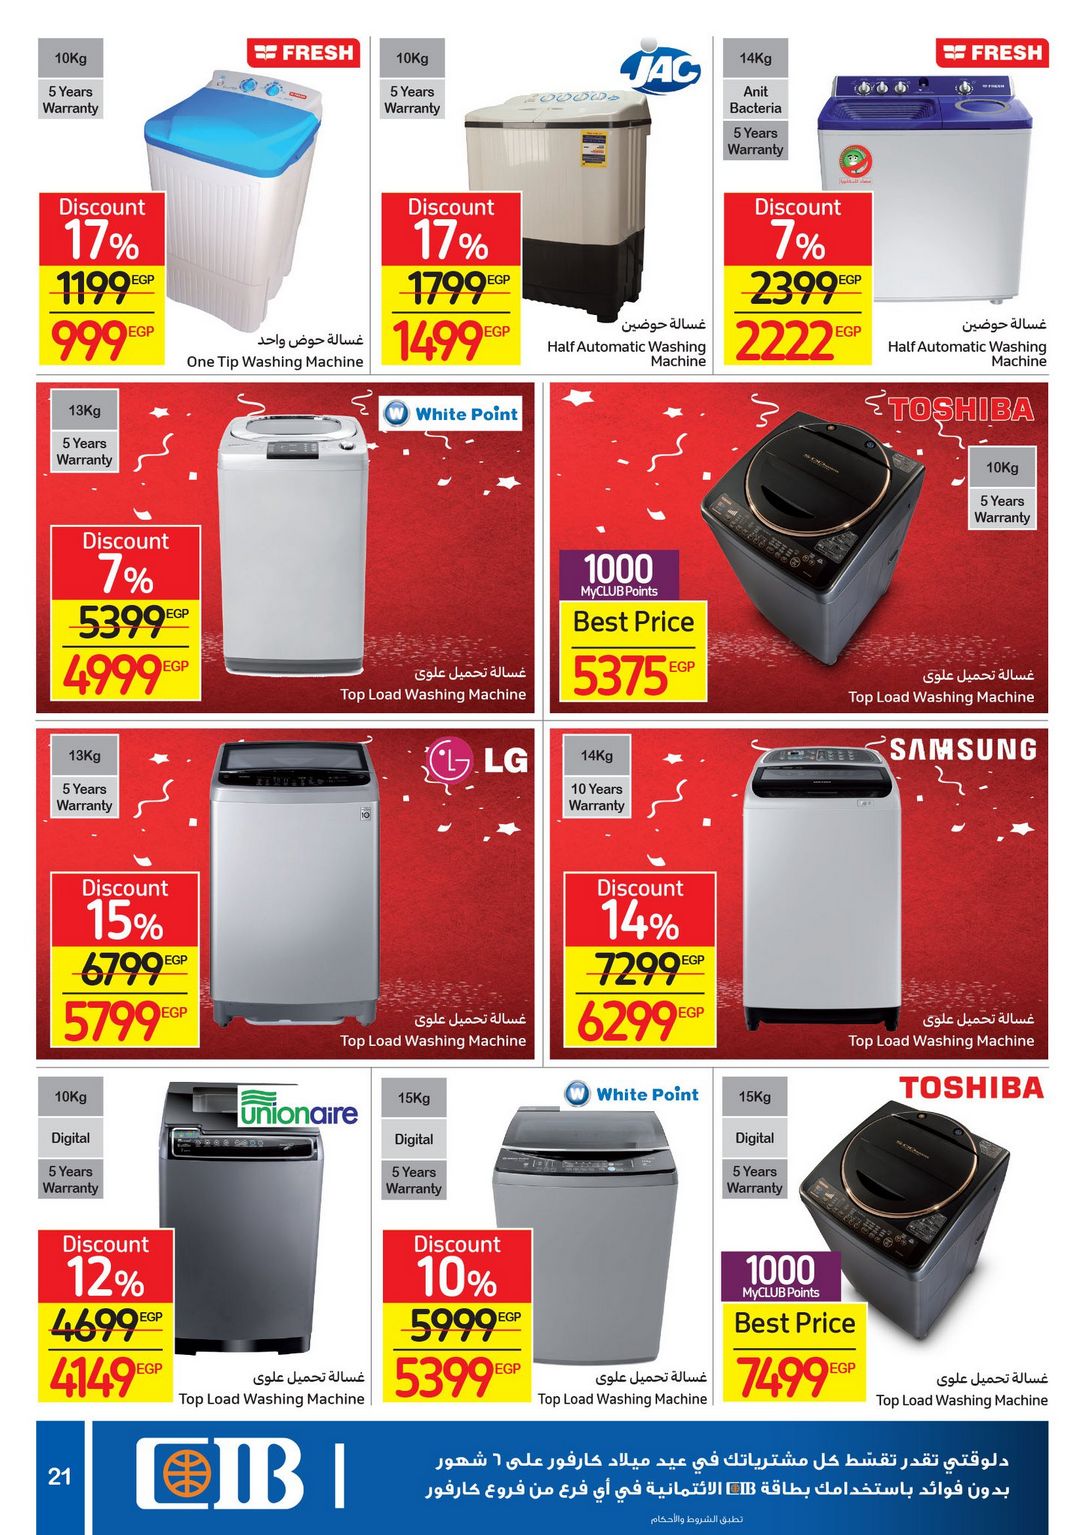 Carrefour Anniversary Offers till 18/2/2021 | Carrefour Egypt 23